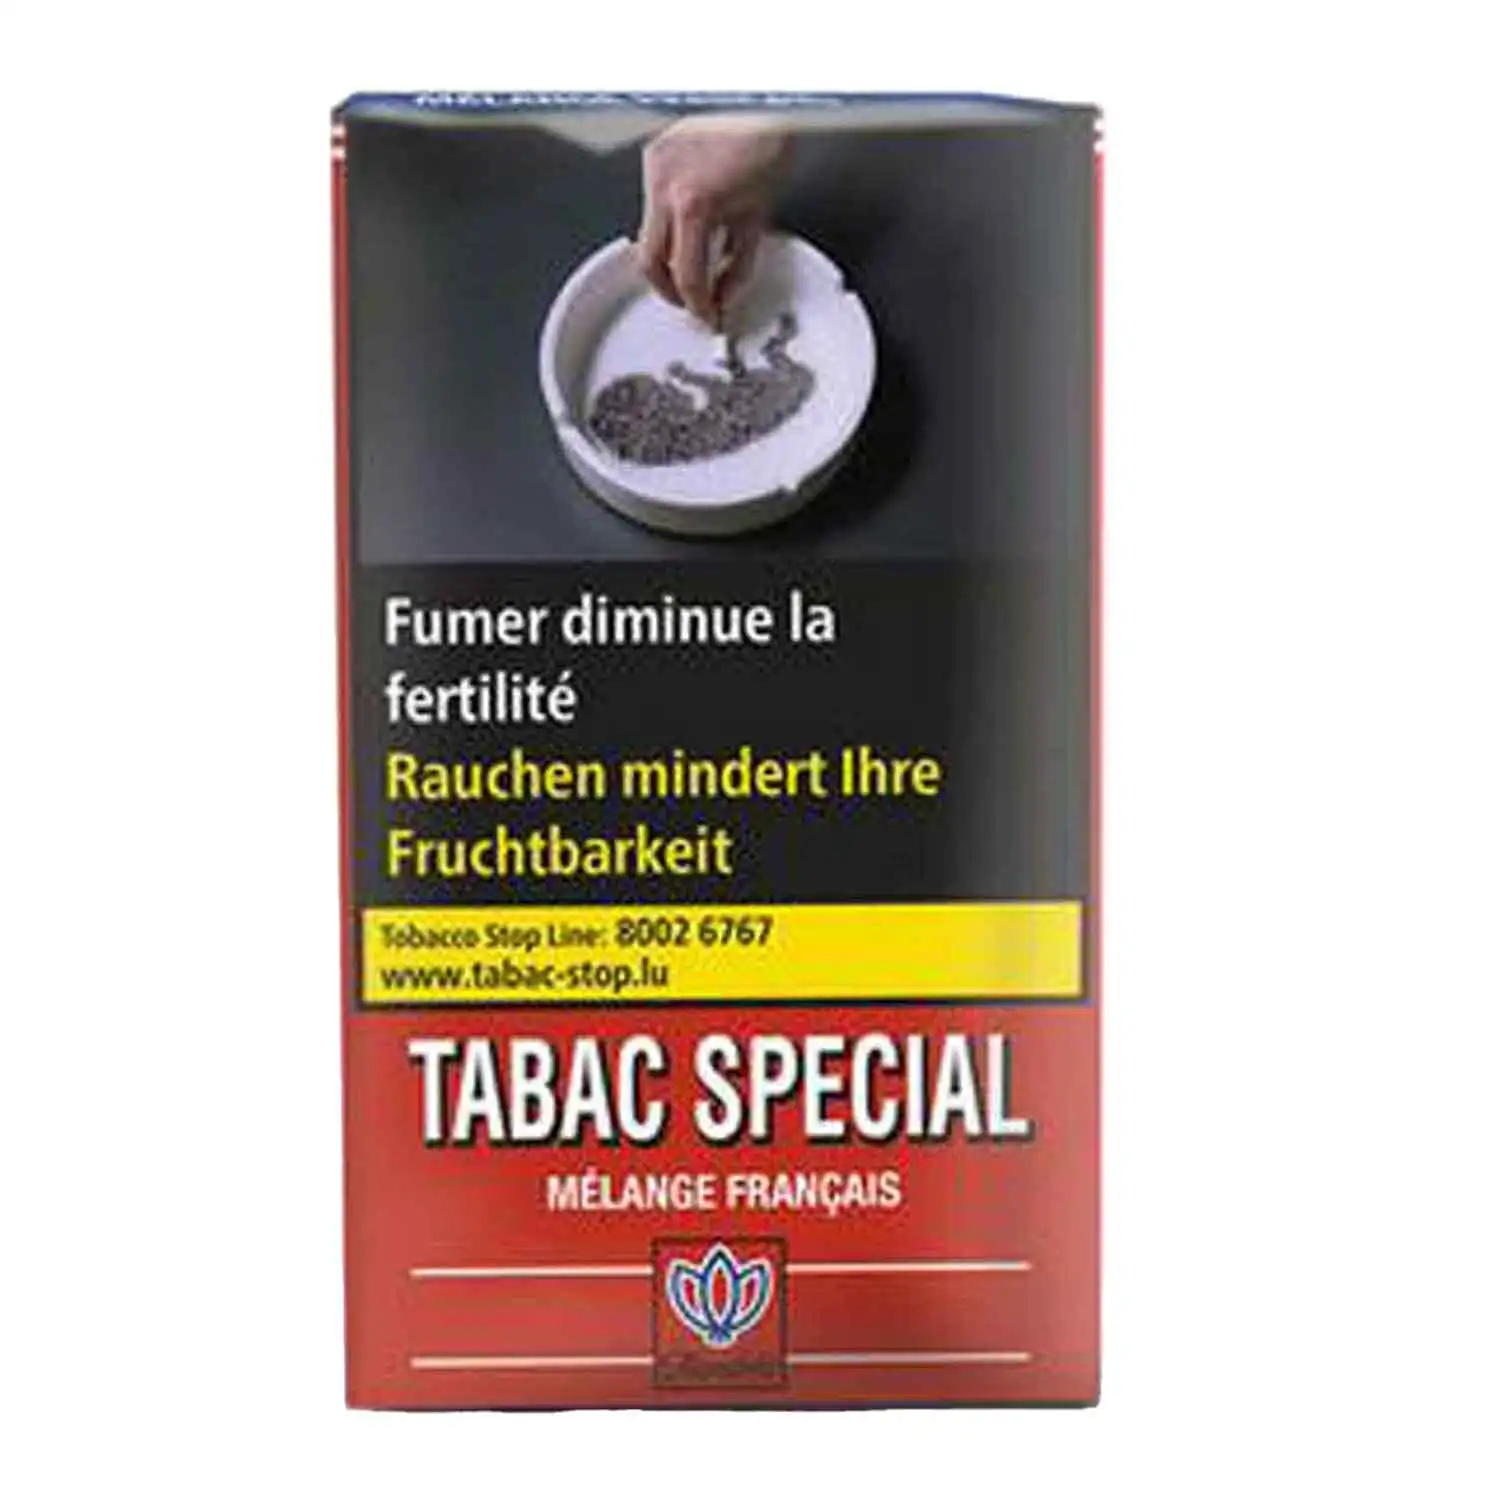 Tabac Special 50g - Buy at Real Tobacco